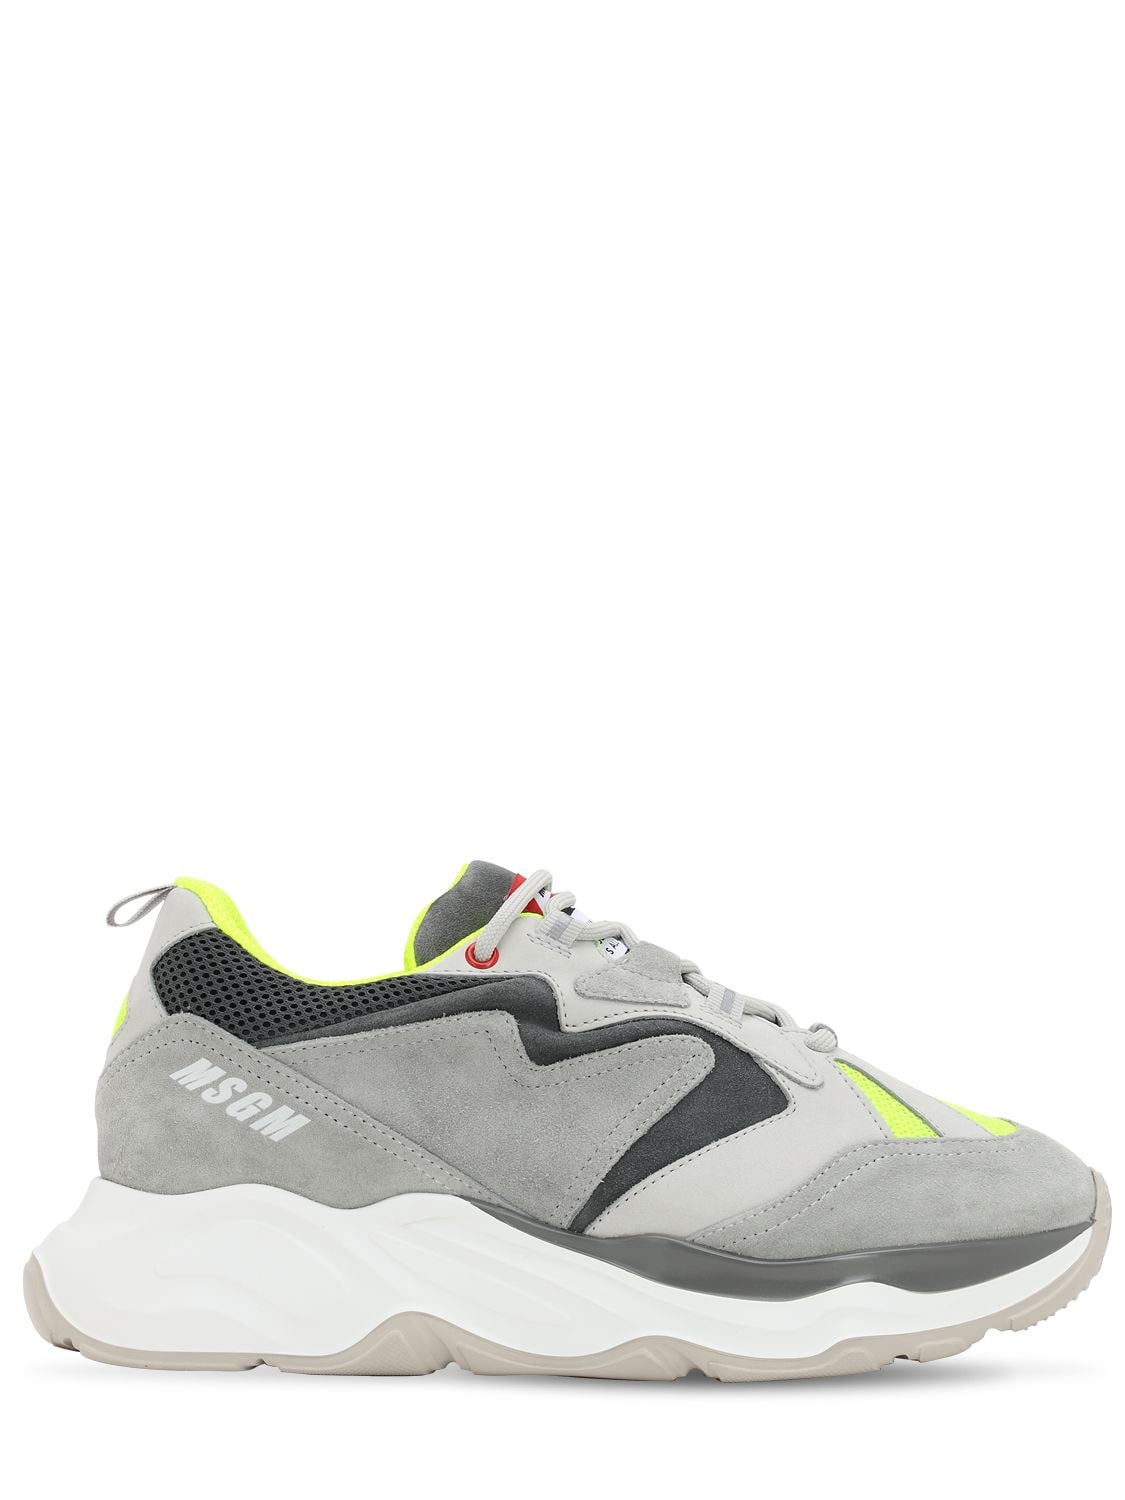 MSGM CHUNKY MESH & SUEDE SNEAKERS,70I0K1006-OTY1